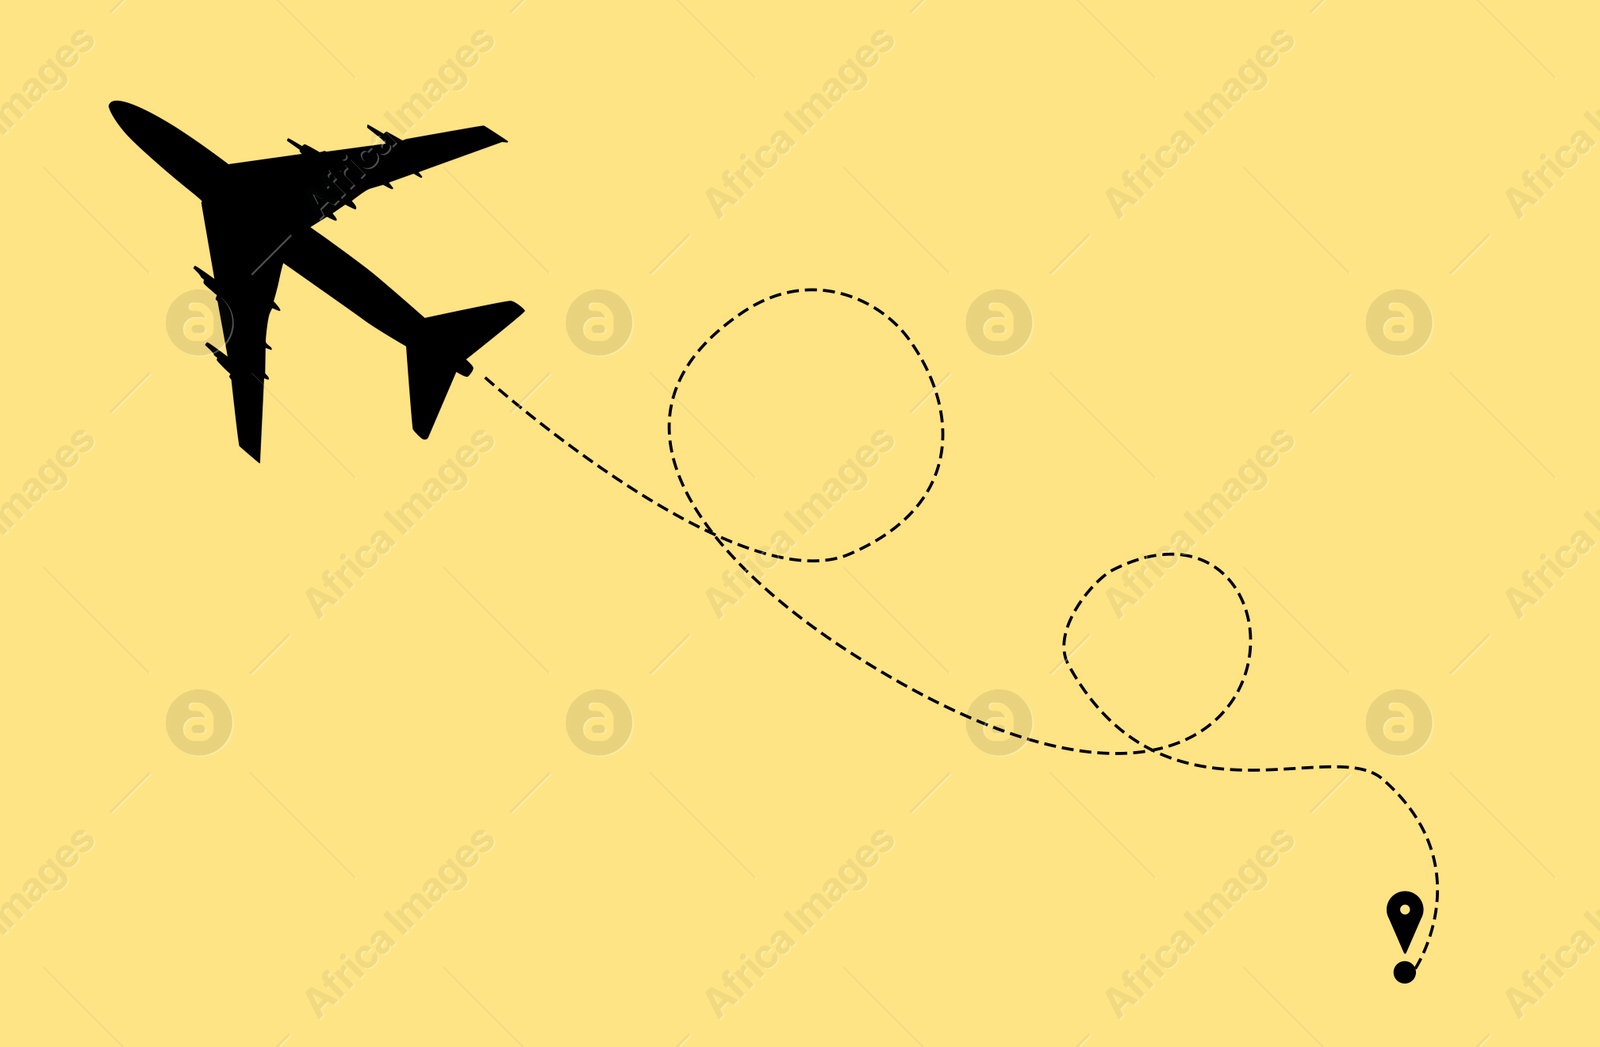 Illustration of Flight direction illustration. Plane silhouette and pin connected by dashed line on yellow background